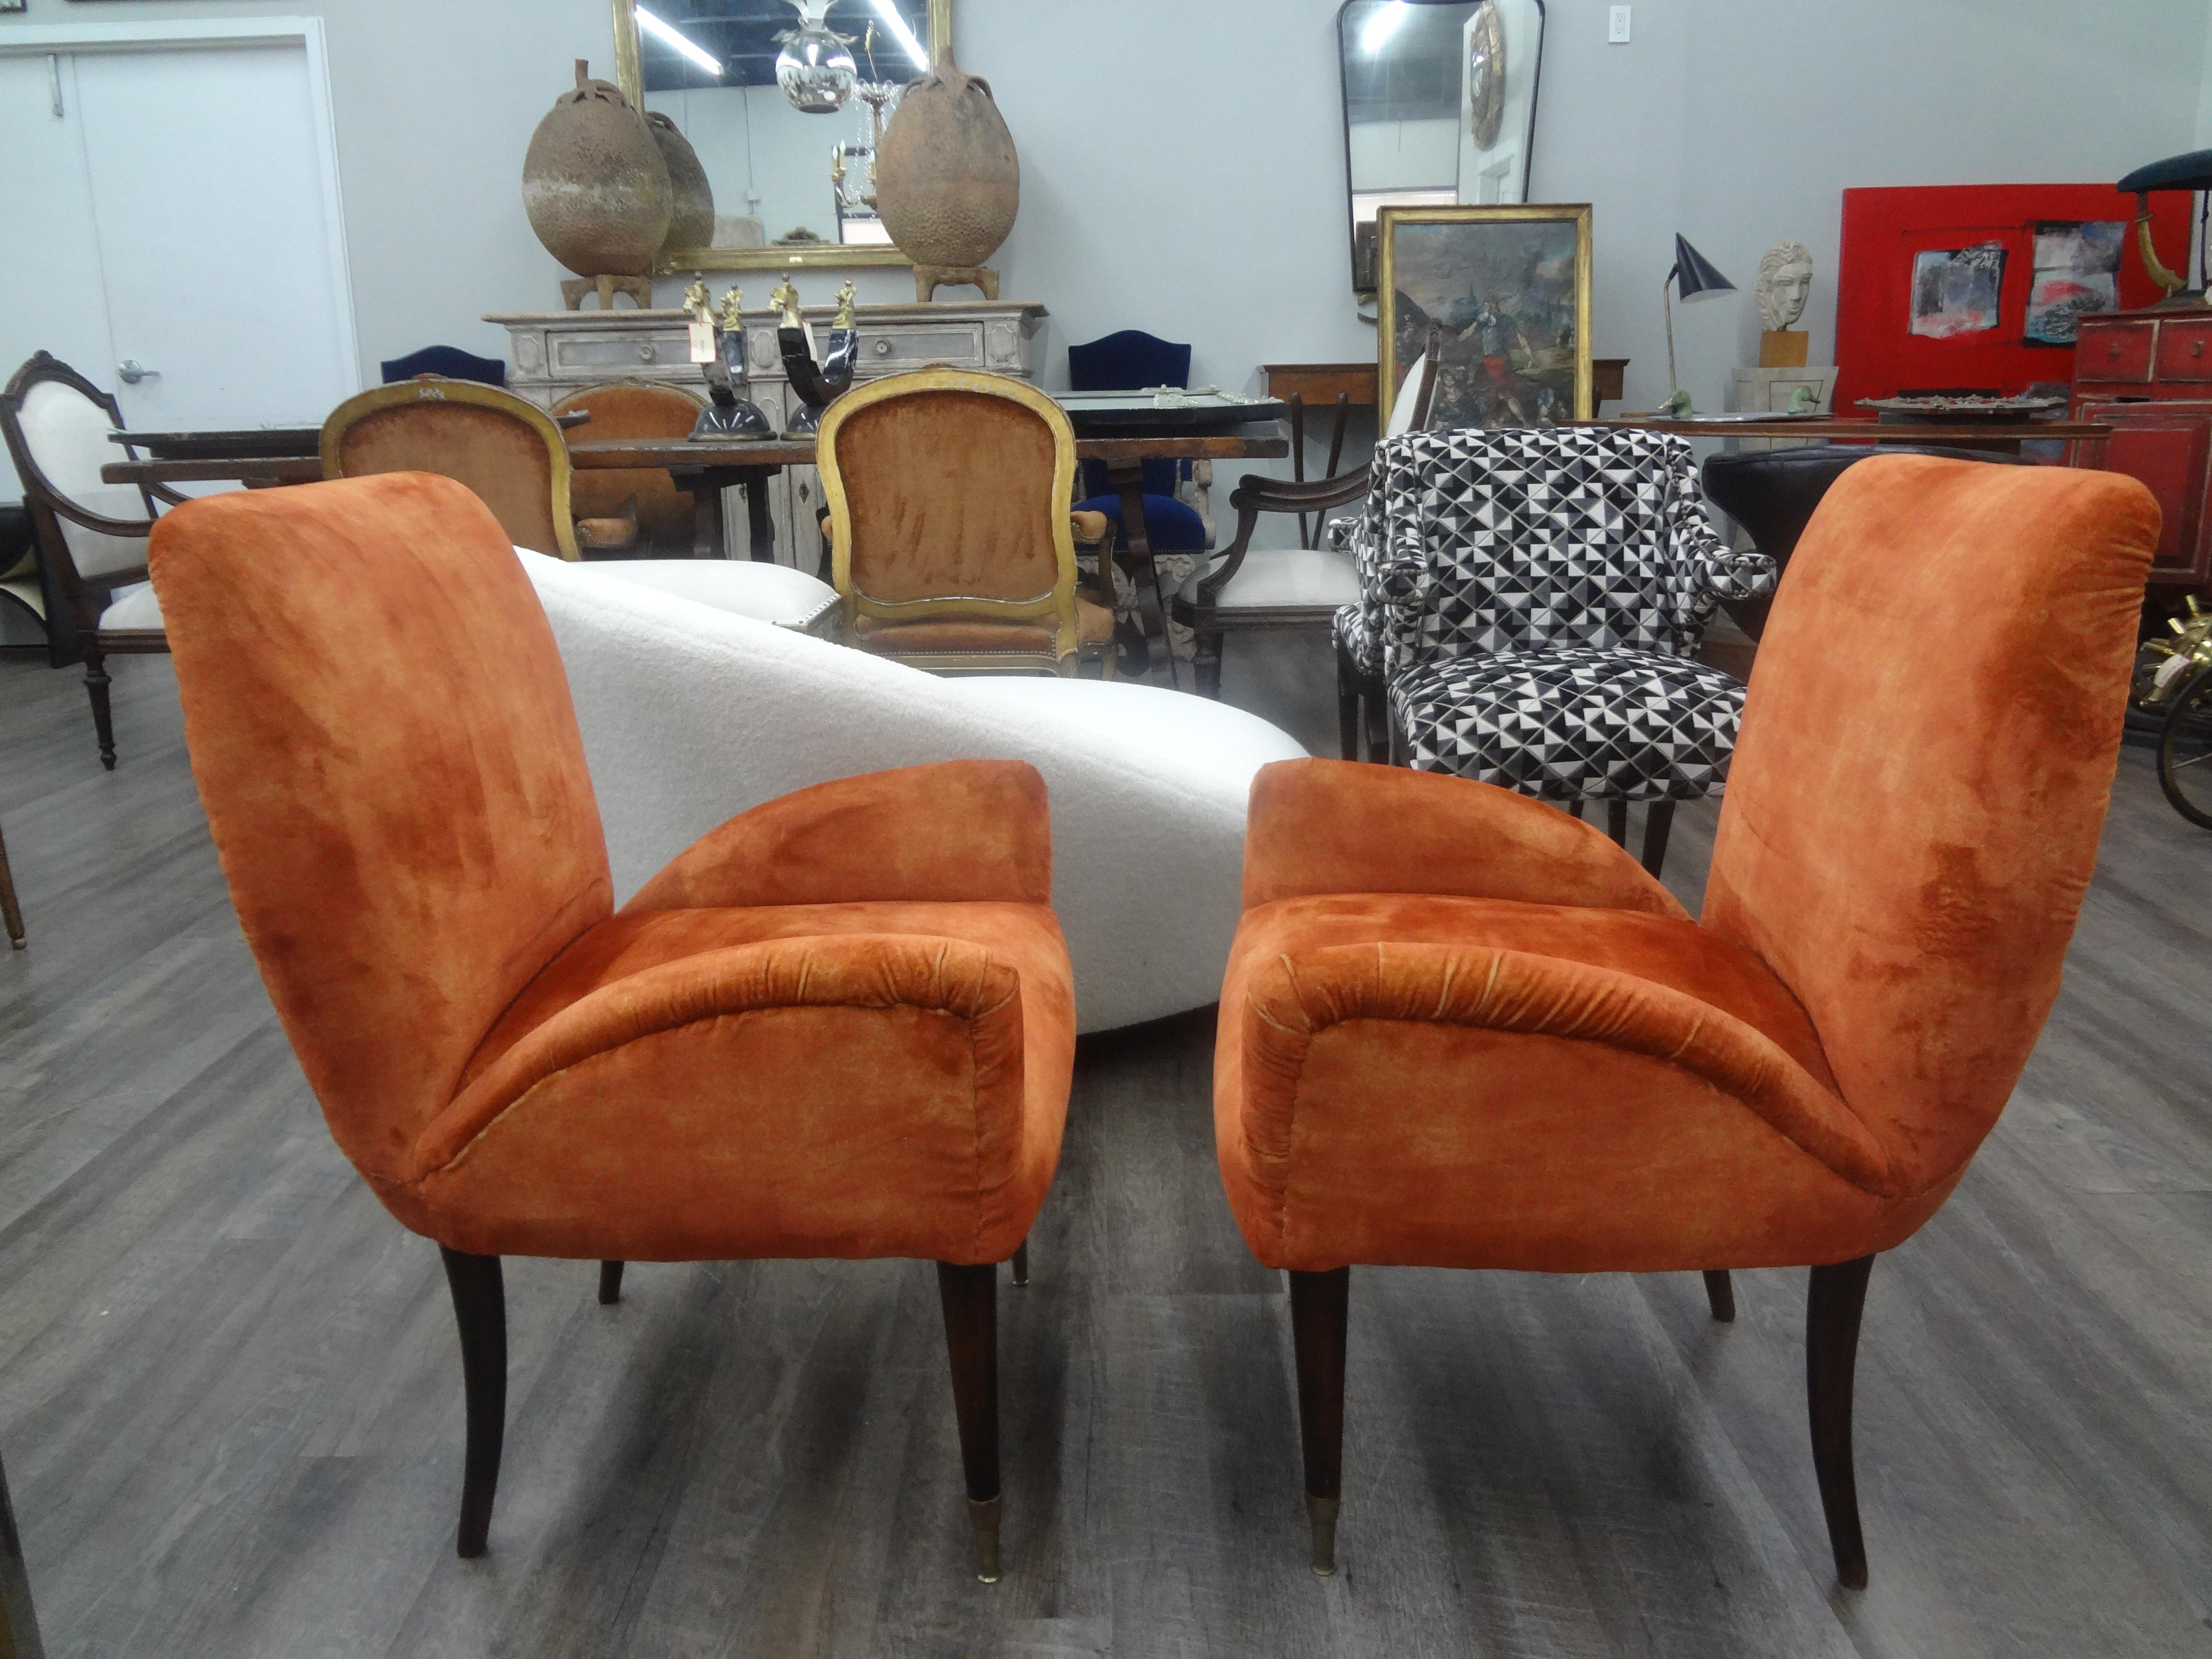 Pair of Italian modern sculptural lounge chairs.
This handsome pair of Italian midcentury lounge chairs were recently upholstered in dark orange Italian velvet and have beautiful tapered legs with bronze sabots.
Great sculptural design that's